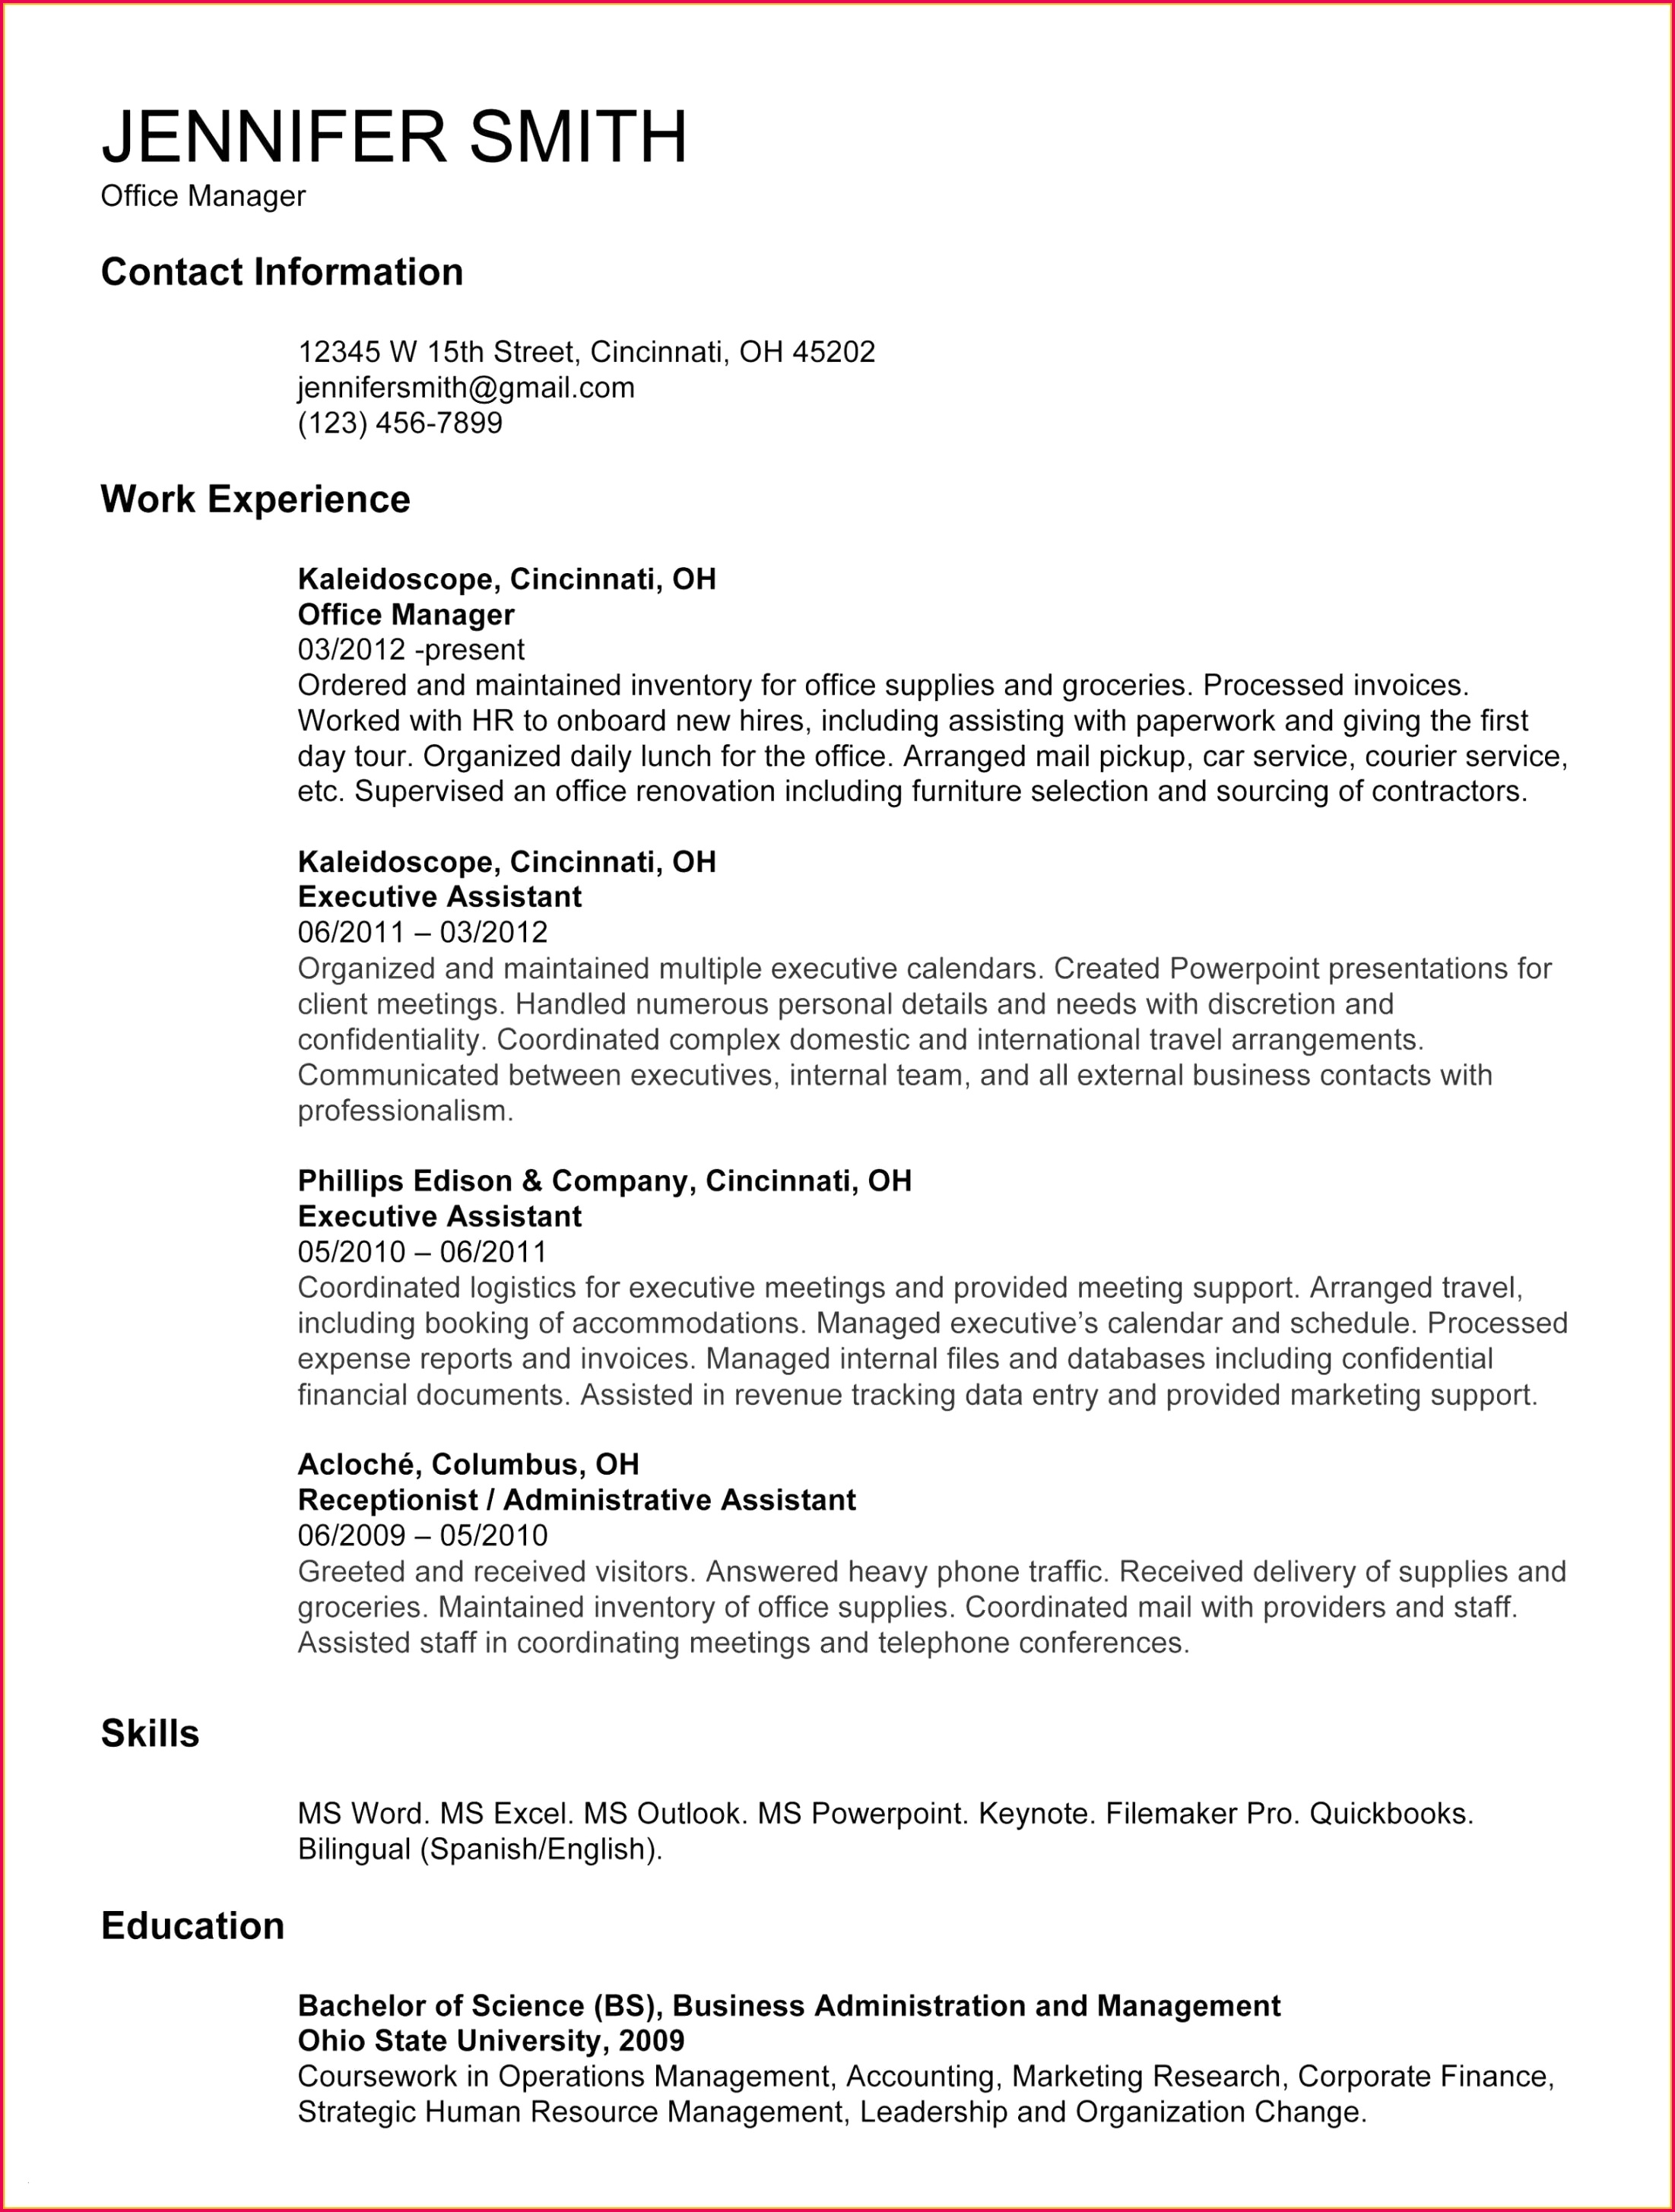 Free Fresh Reception Resume Luxury American Resume Sample New Student Resume 0d where Can I Post